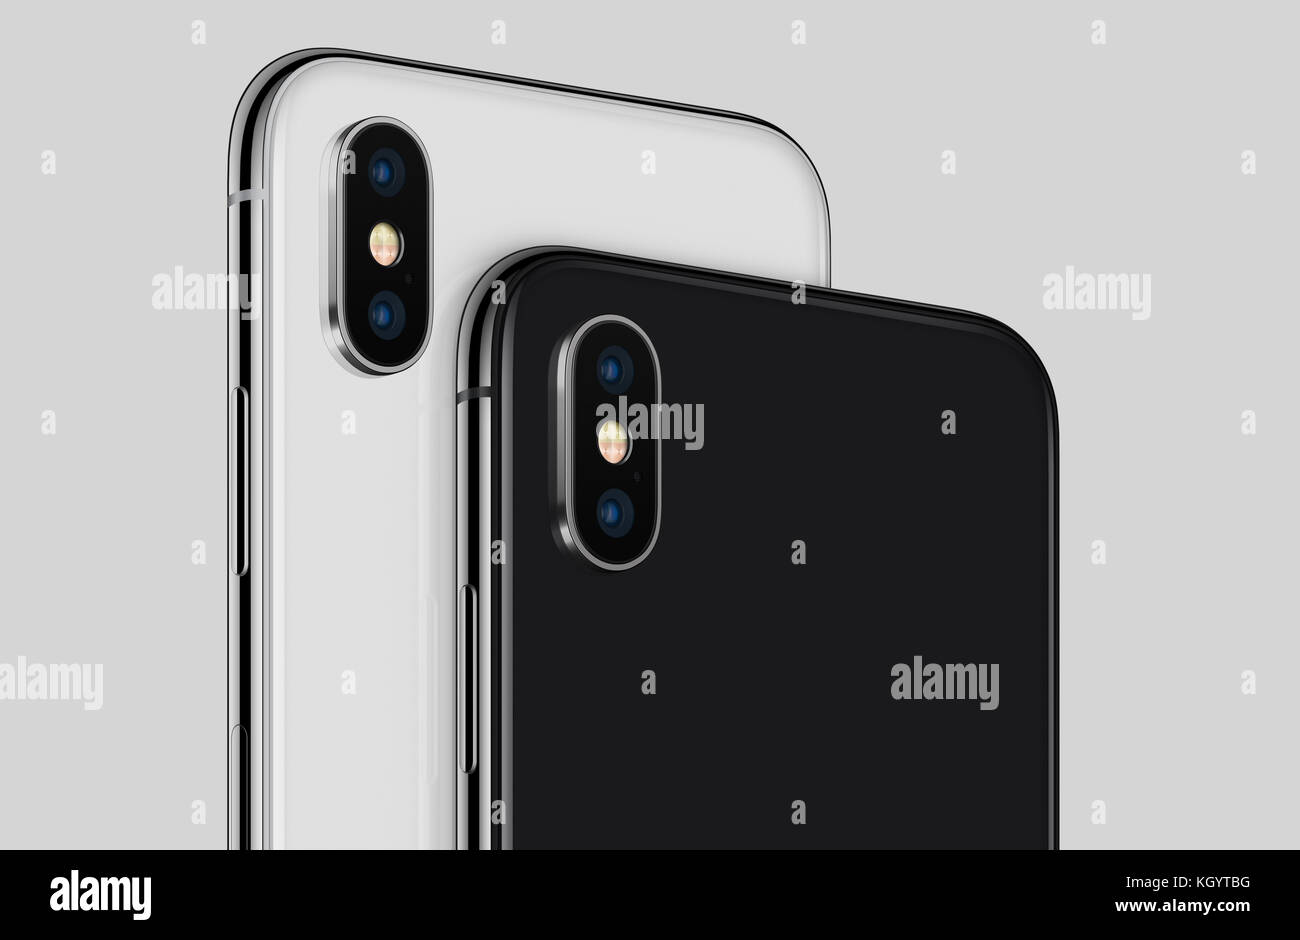 avond Bekijk het internet Vlucht Close-up white and black rotated smartphone similar to iPhone X back sides  with camera modules, cropped Stock Photo - Alamy